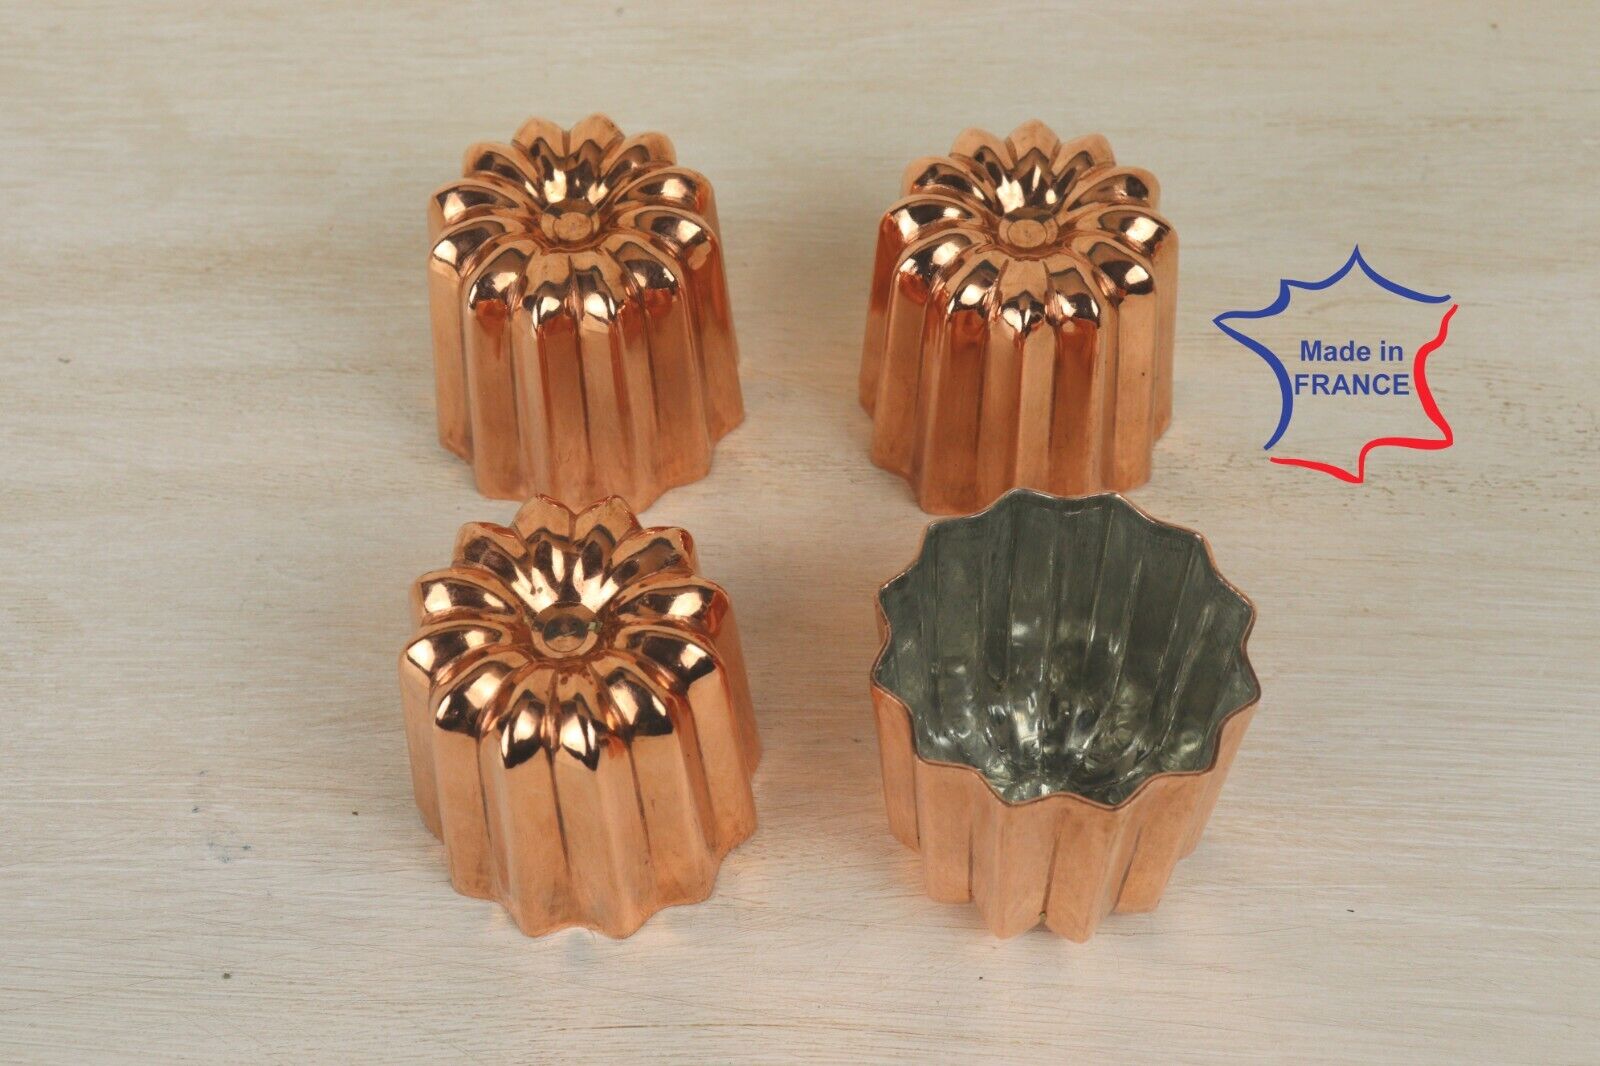 4 Copper canele molds Large 2.1 inches 4 Copper Cannele made in France